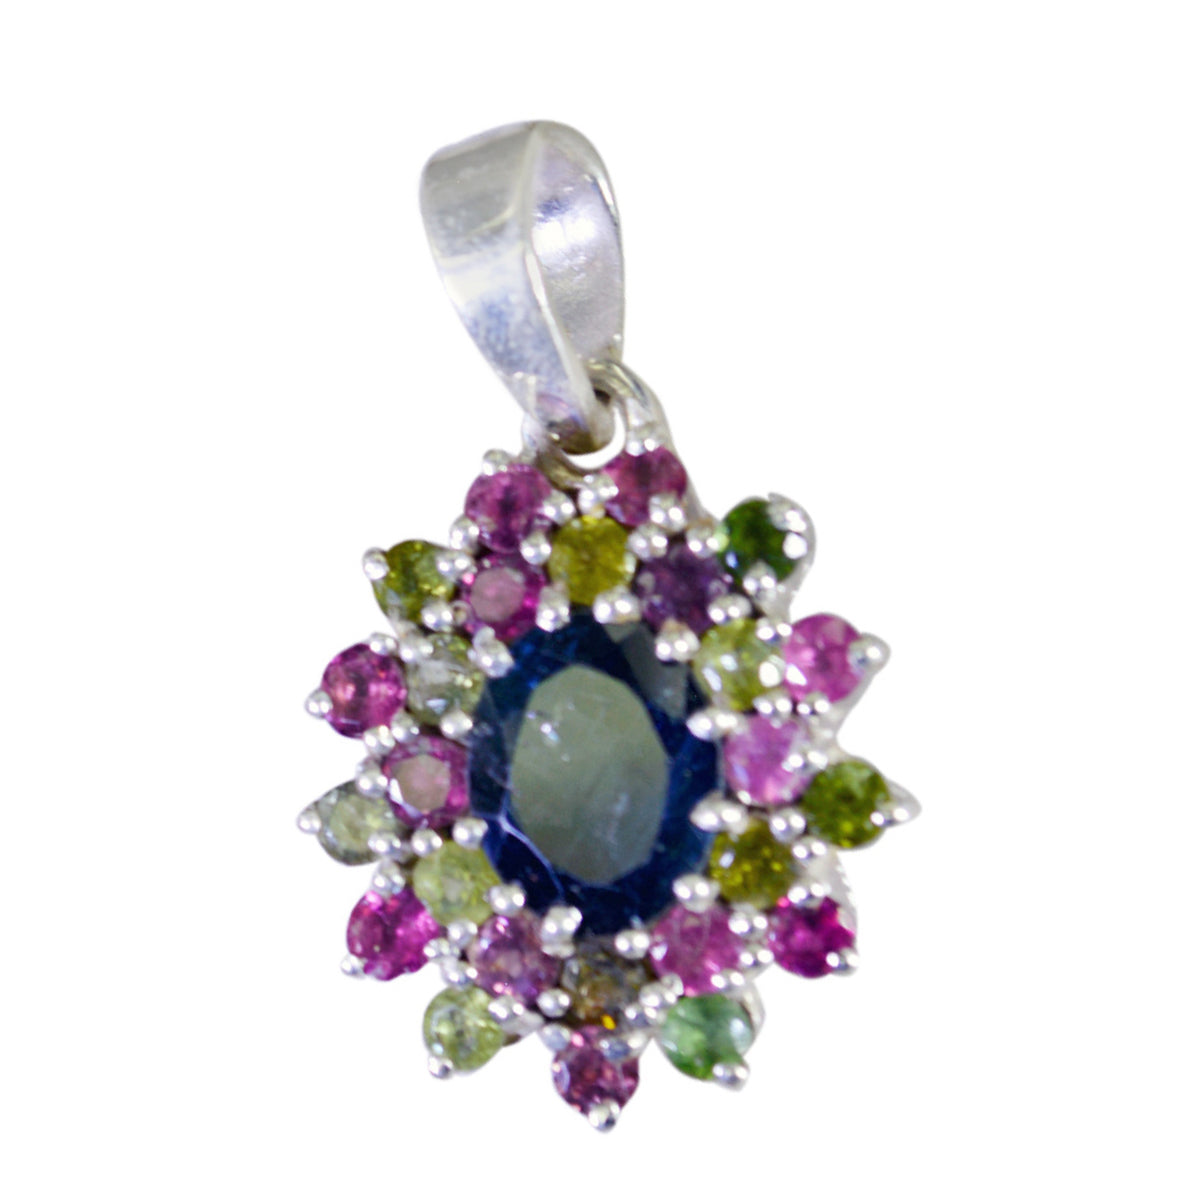 Riyo Good Gemstone Multi Faceted Multi Color Tourmaline 1079 Sterling Silver Pendant Gift For Teachers Day